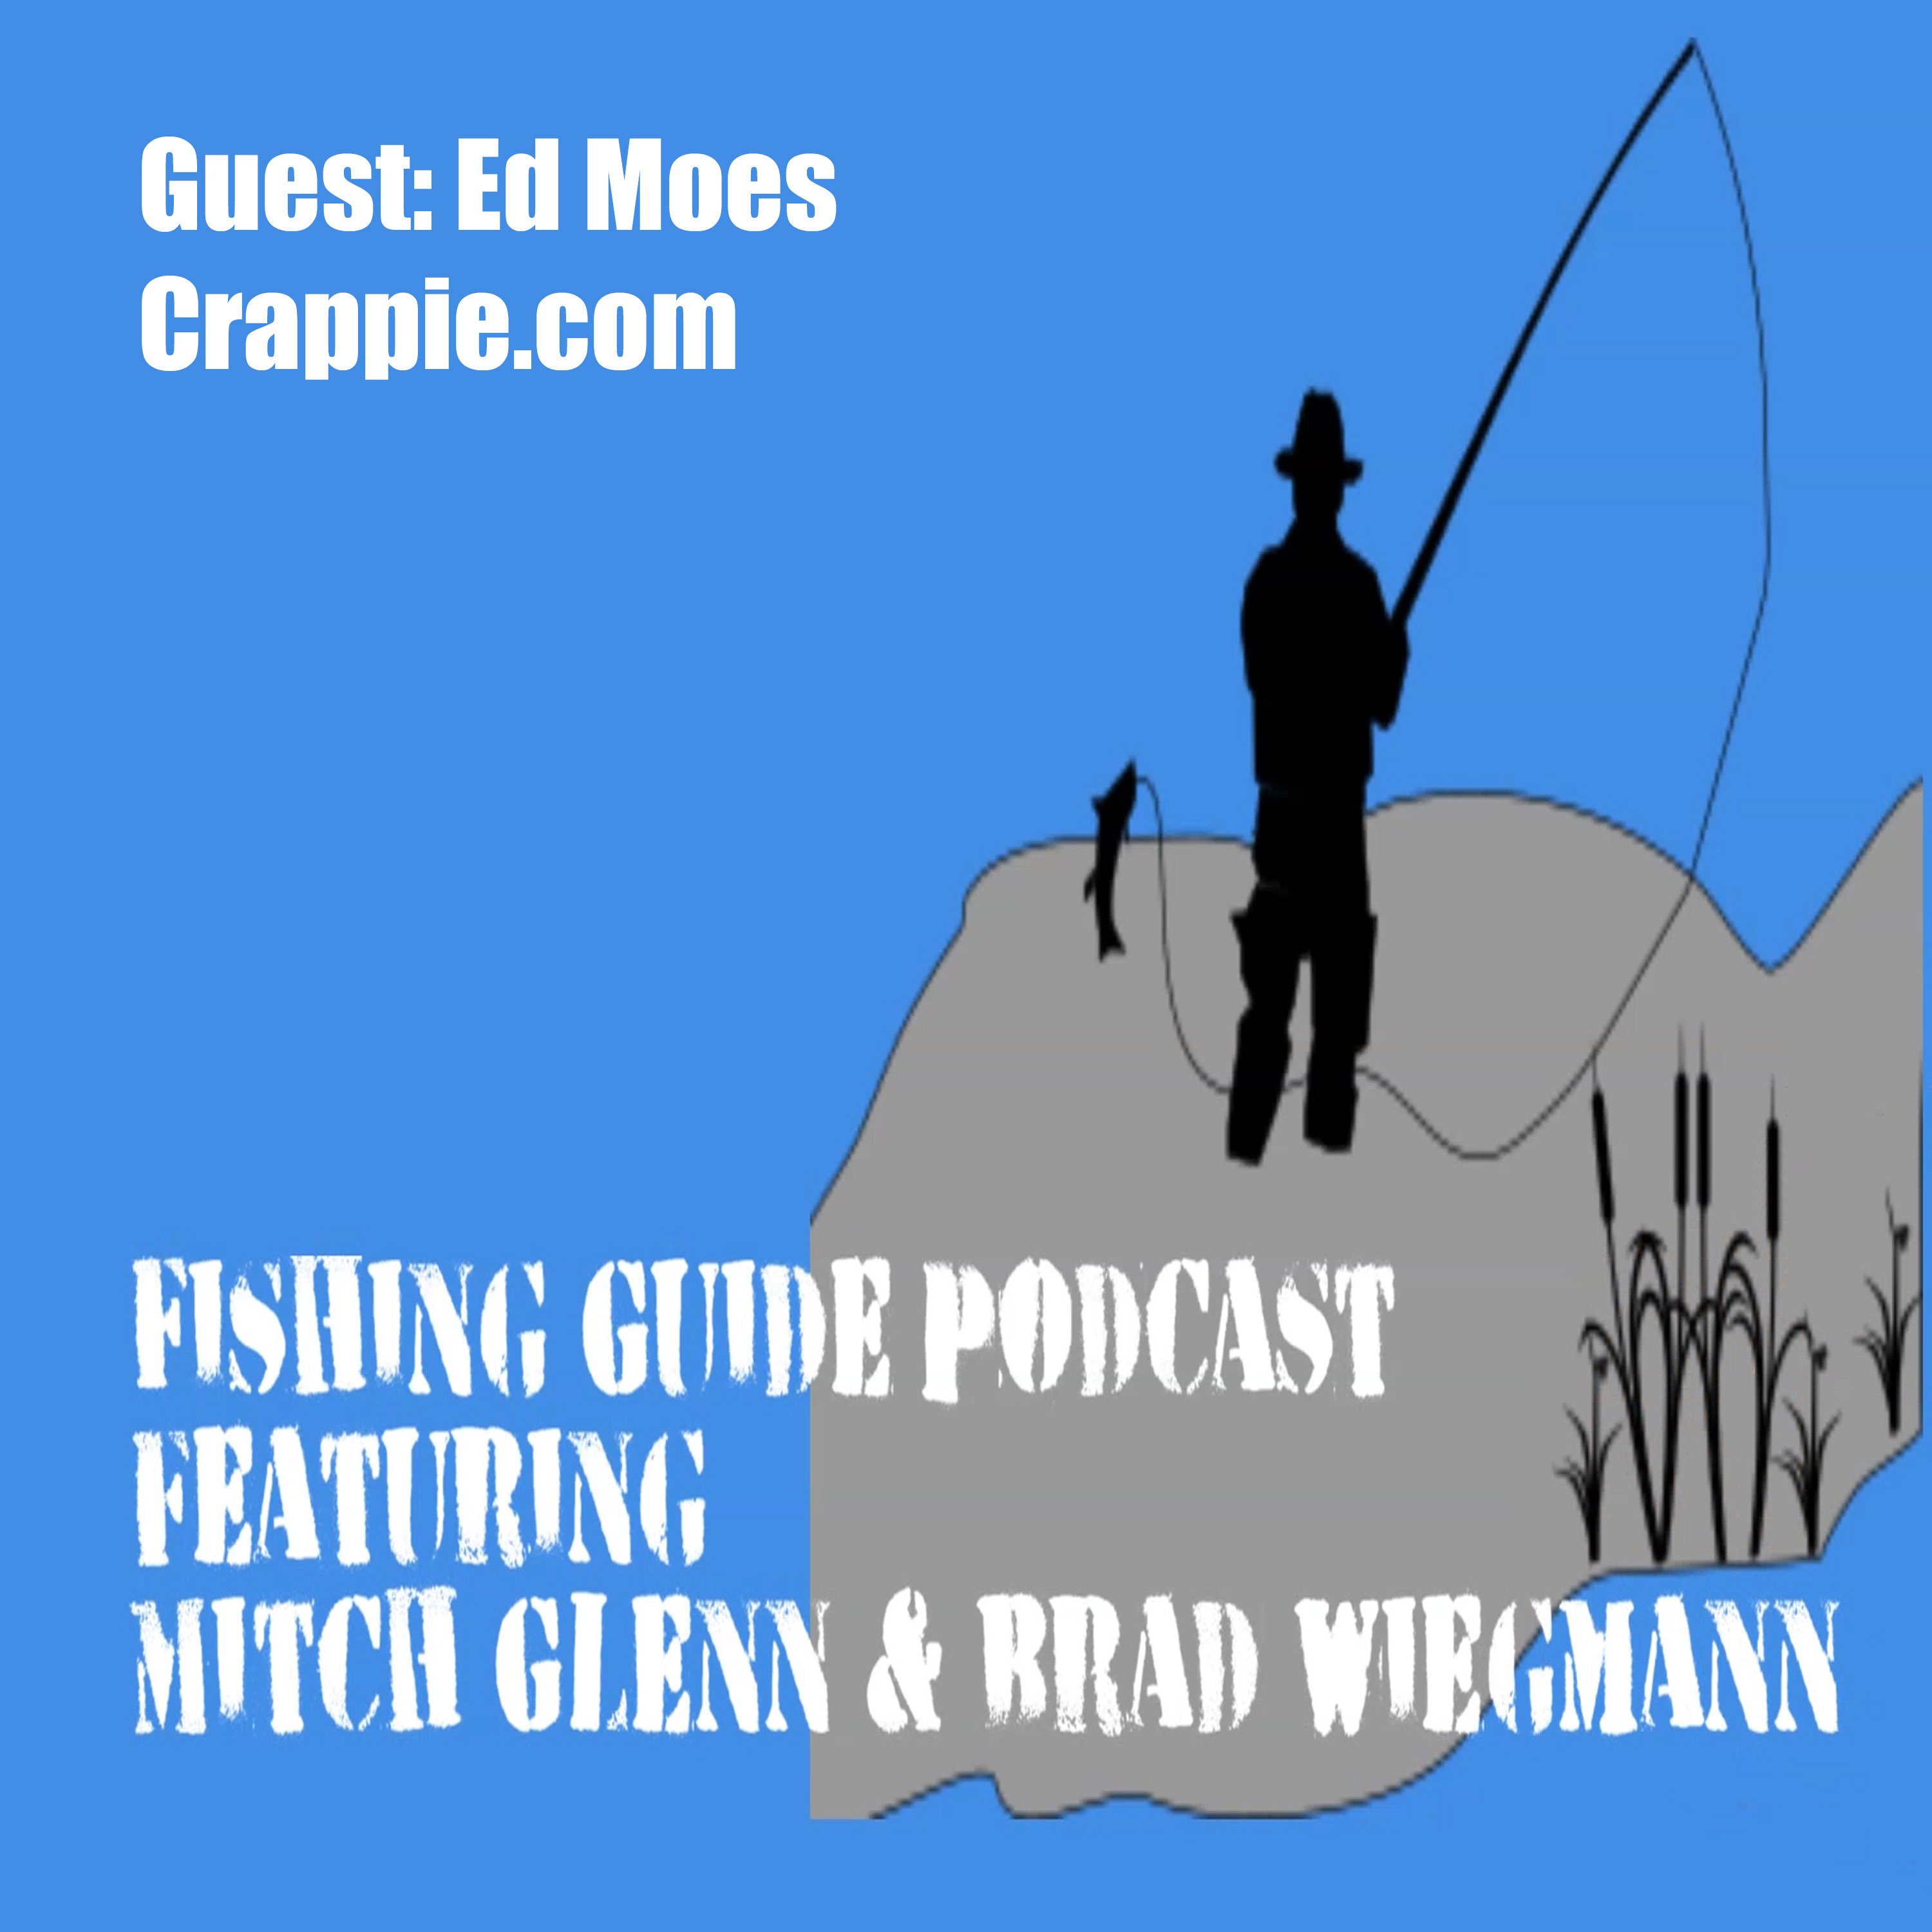 How and why Crappie.com is the number one crappie website featuring Ed Moes: Episode 1